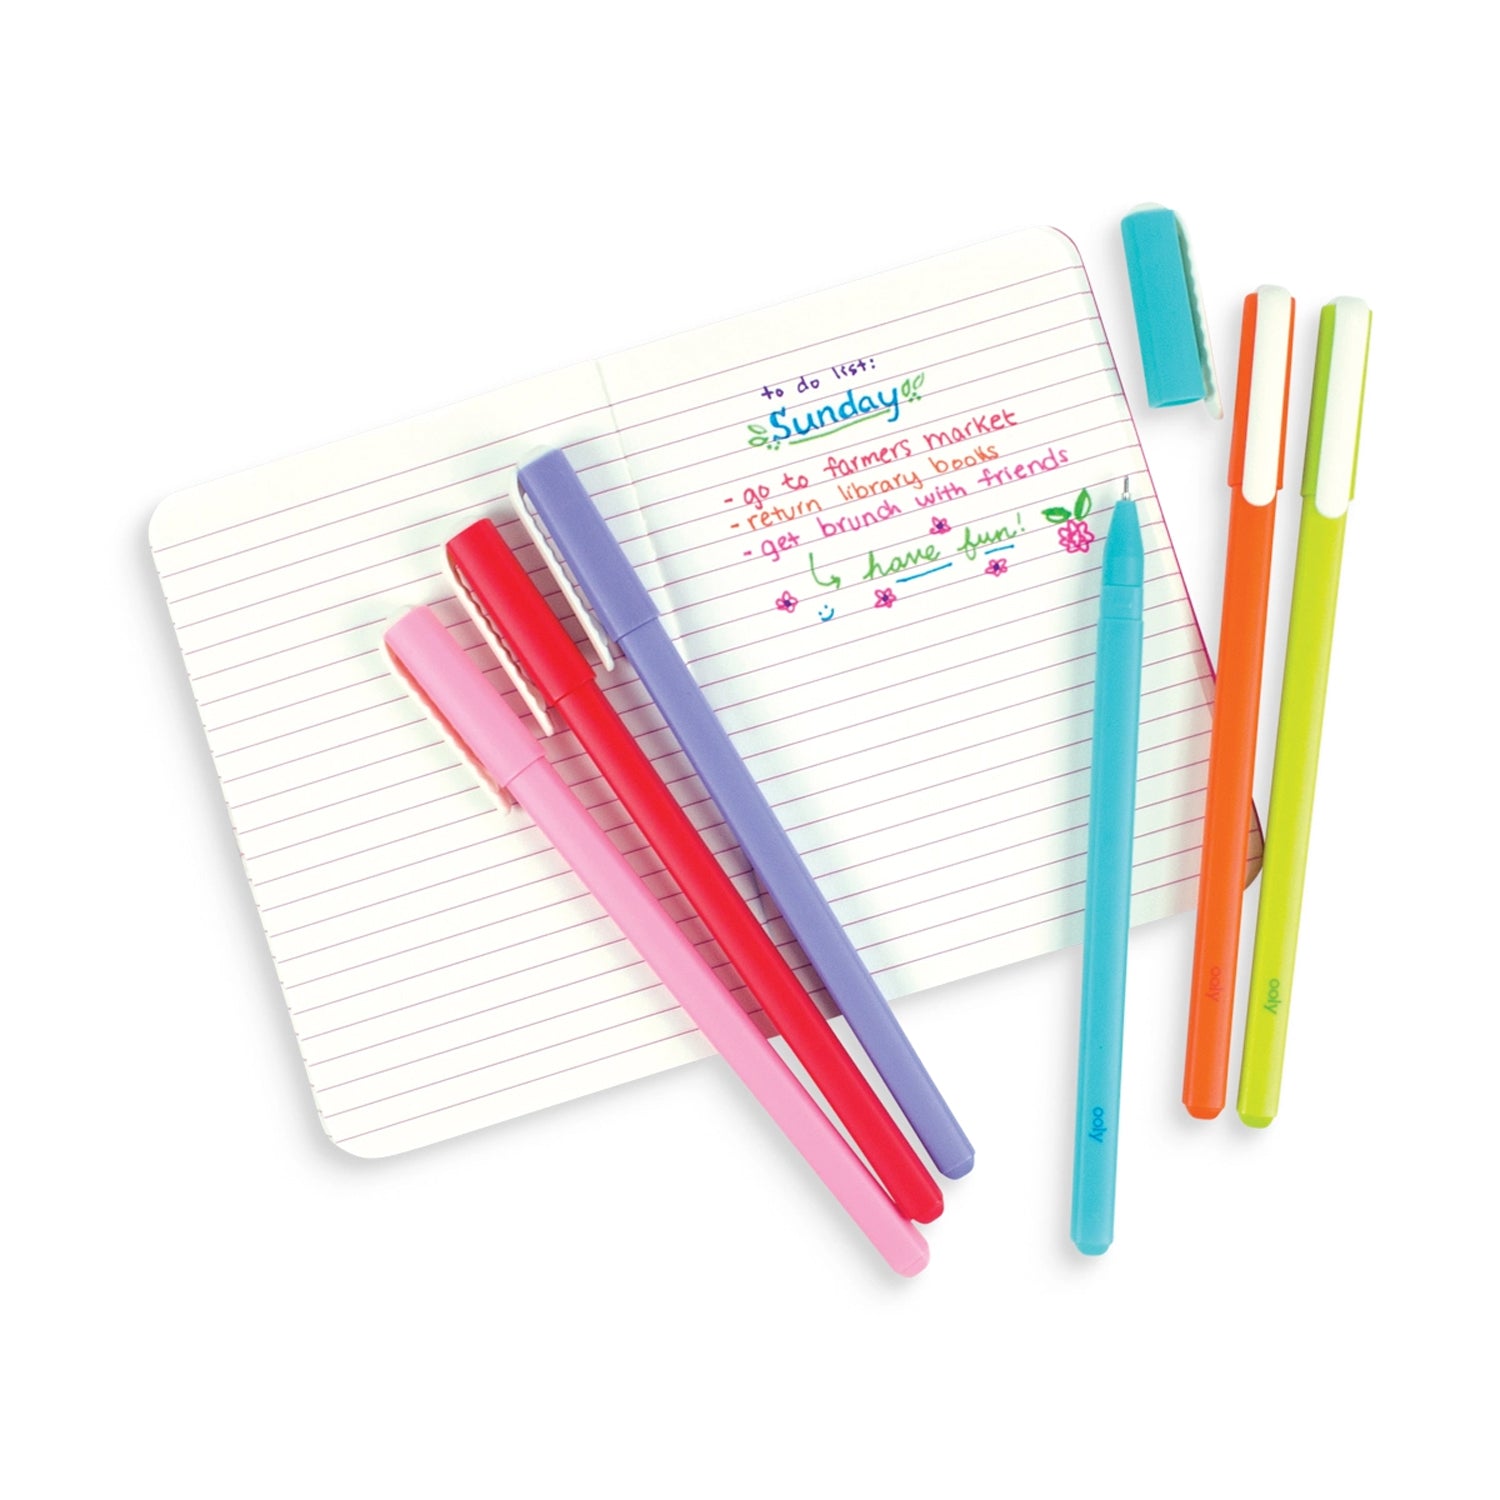 Ooly | Totally Taffy Scented Gel Pens - Set of 6